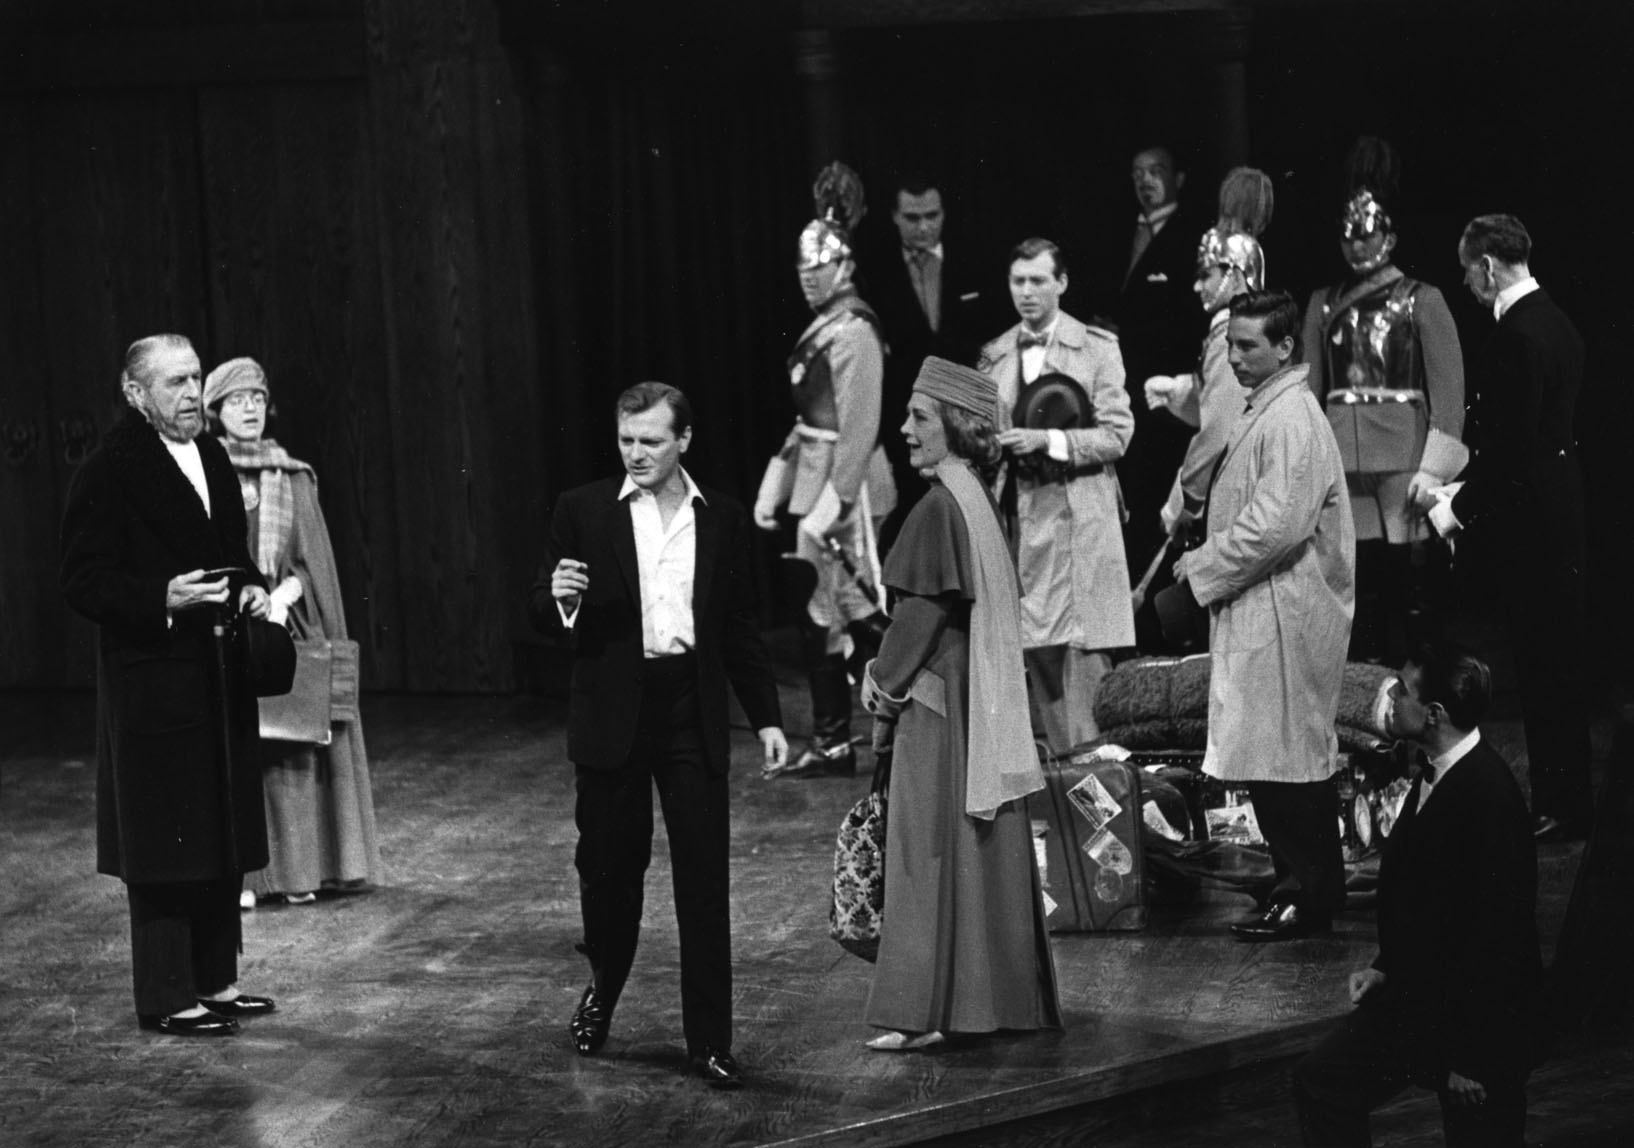 George Grizzard and the Minnesota Theater Company in the modern dress production of Hamlet that opened the Tyrone Guthrie Theater in 1963.